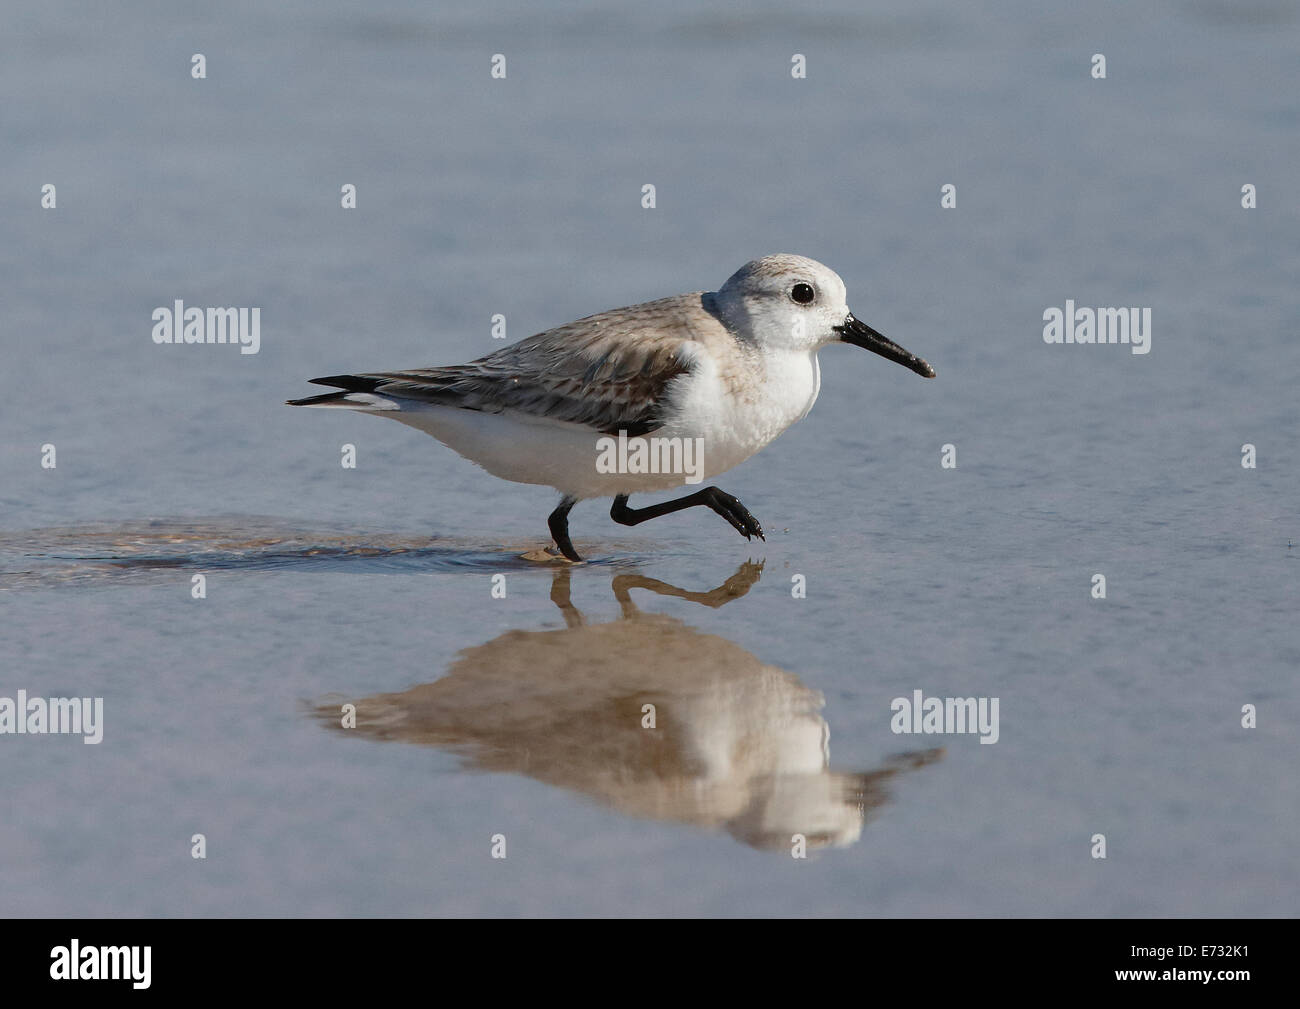 Sanderling (Calidris alba) walking in water with reflection Stock Photo